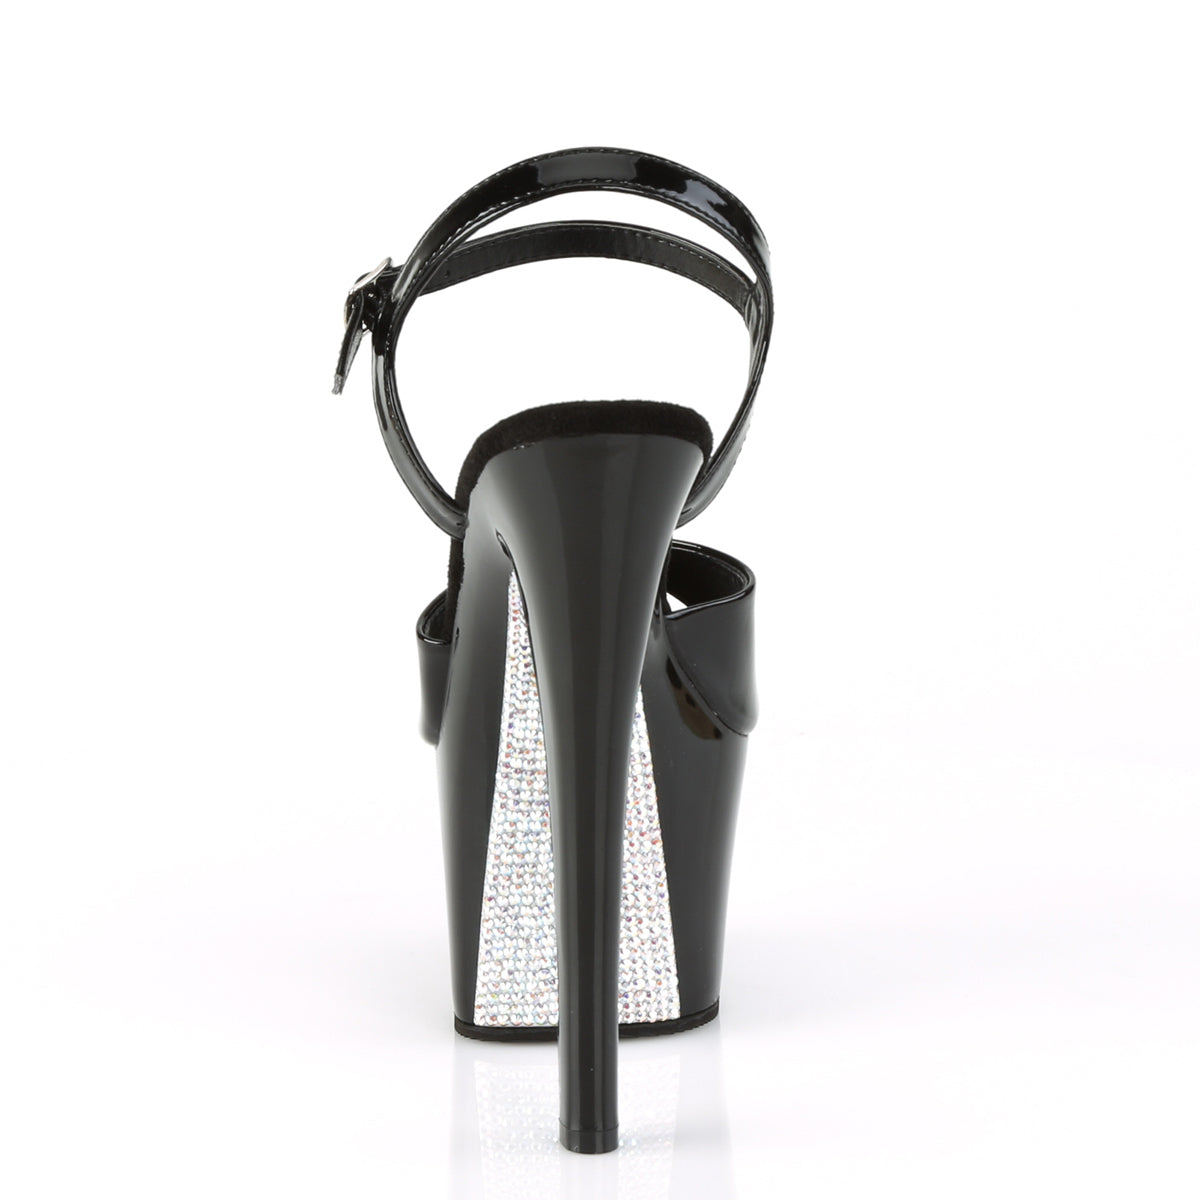 SKY-309CRS 7" Heel Black and Silver Pole Dancing Platforms-Pleaser- Sexy Shoes Fetish Footwear